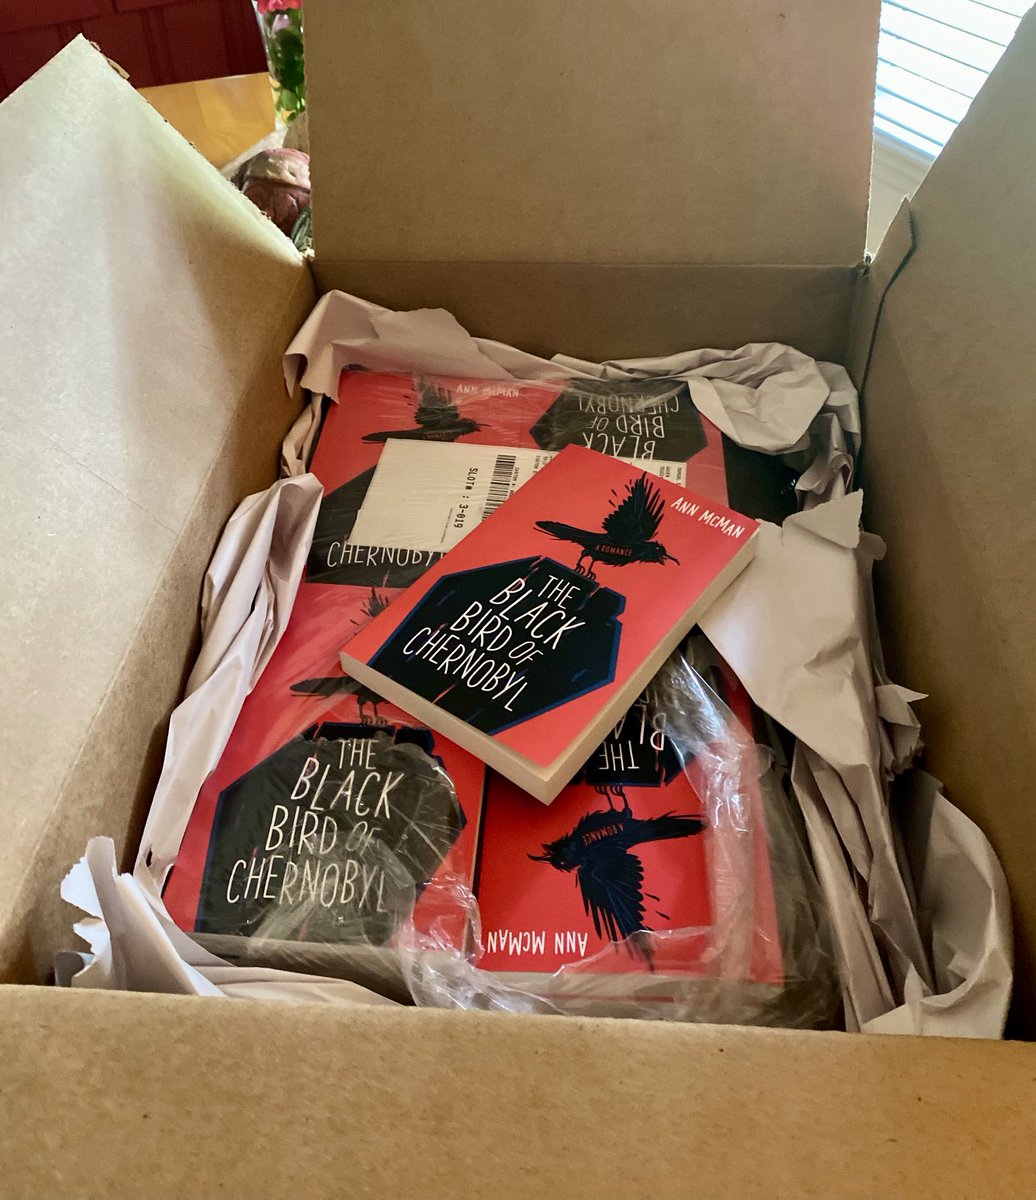 Always a glorious and terrifying occurrence—opening that box of your hot-of-the-press author copies. These look great, but I’d have a Cosmo, regardless! I hope all of you (most of you? some of you?) love this little story as much as I do! #BywaterBooks #GCLS